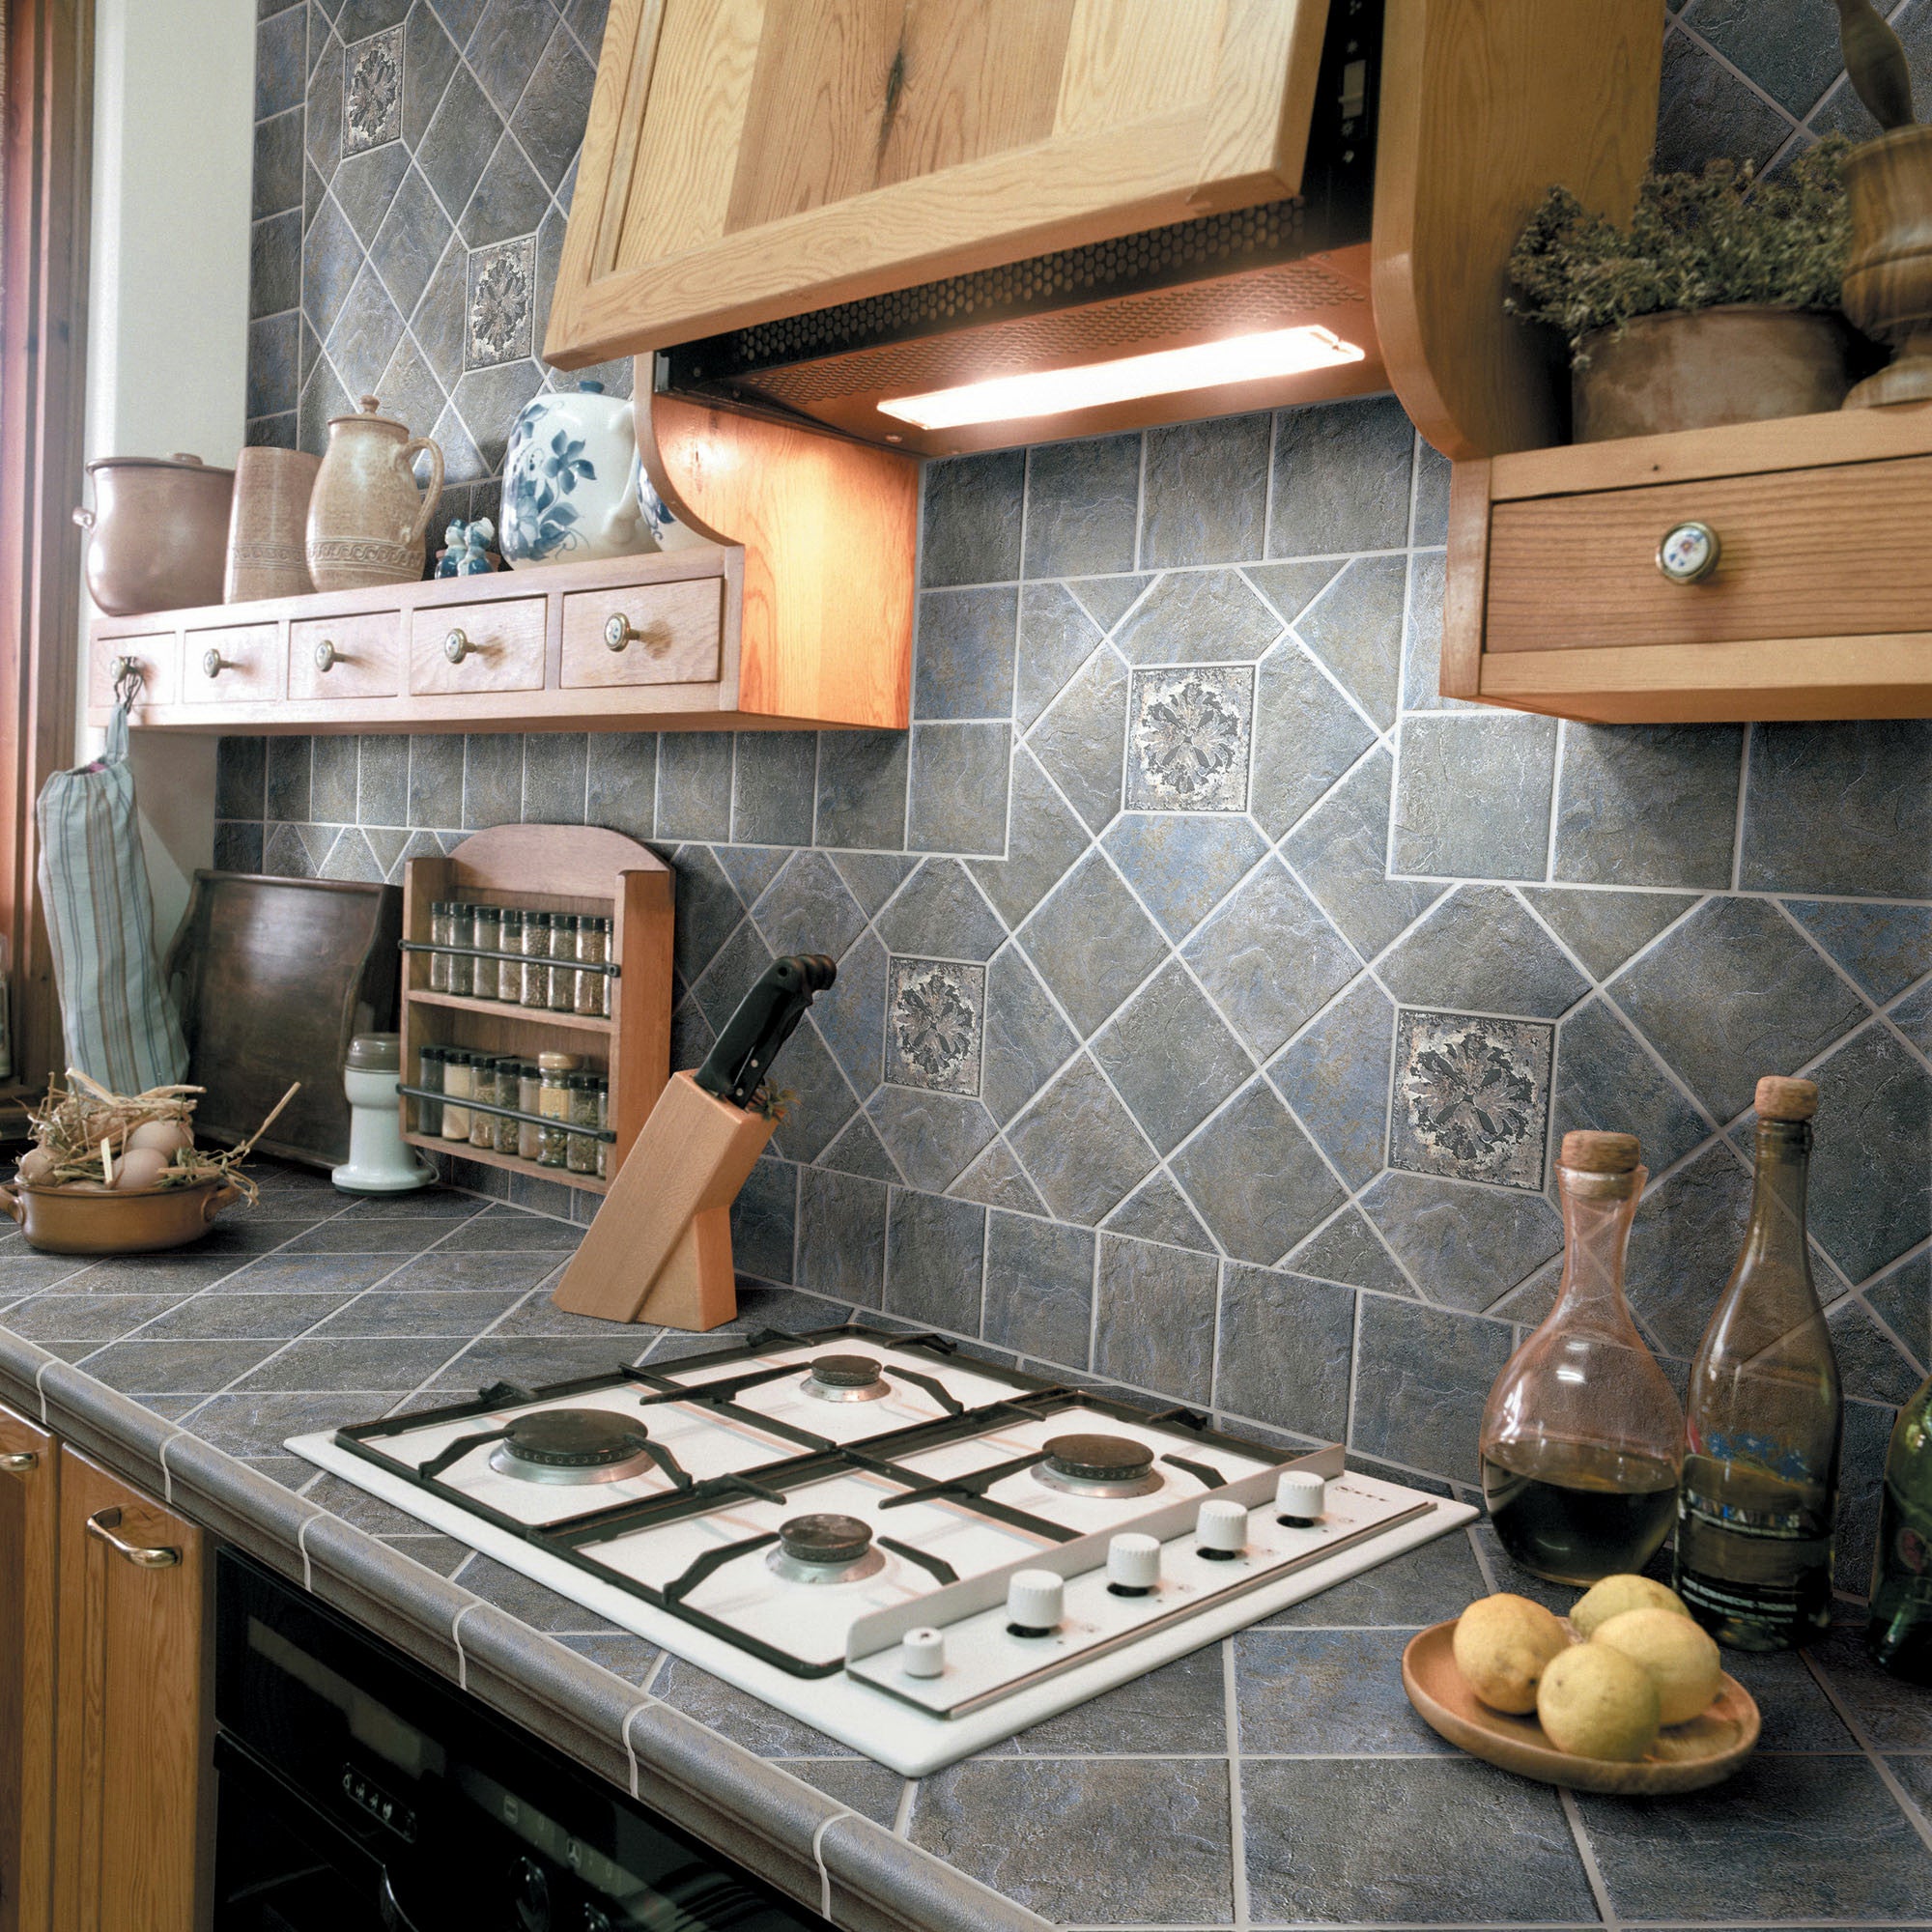 Coordinating tiles for kitchen countertops